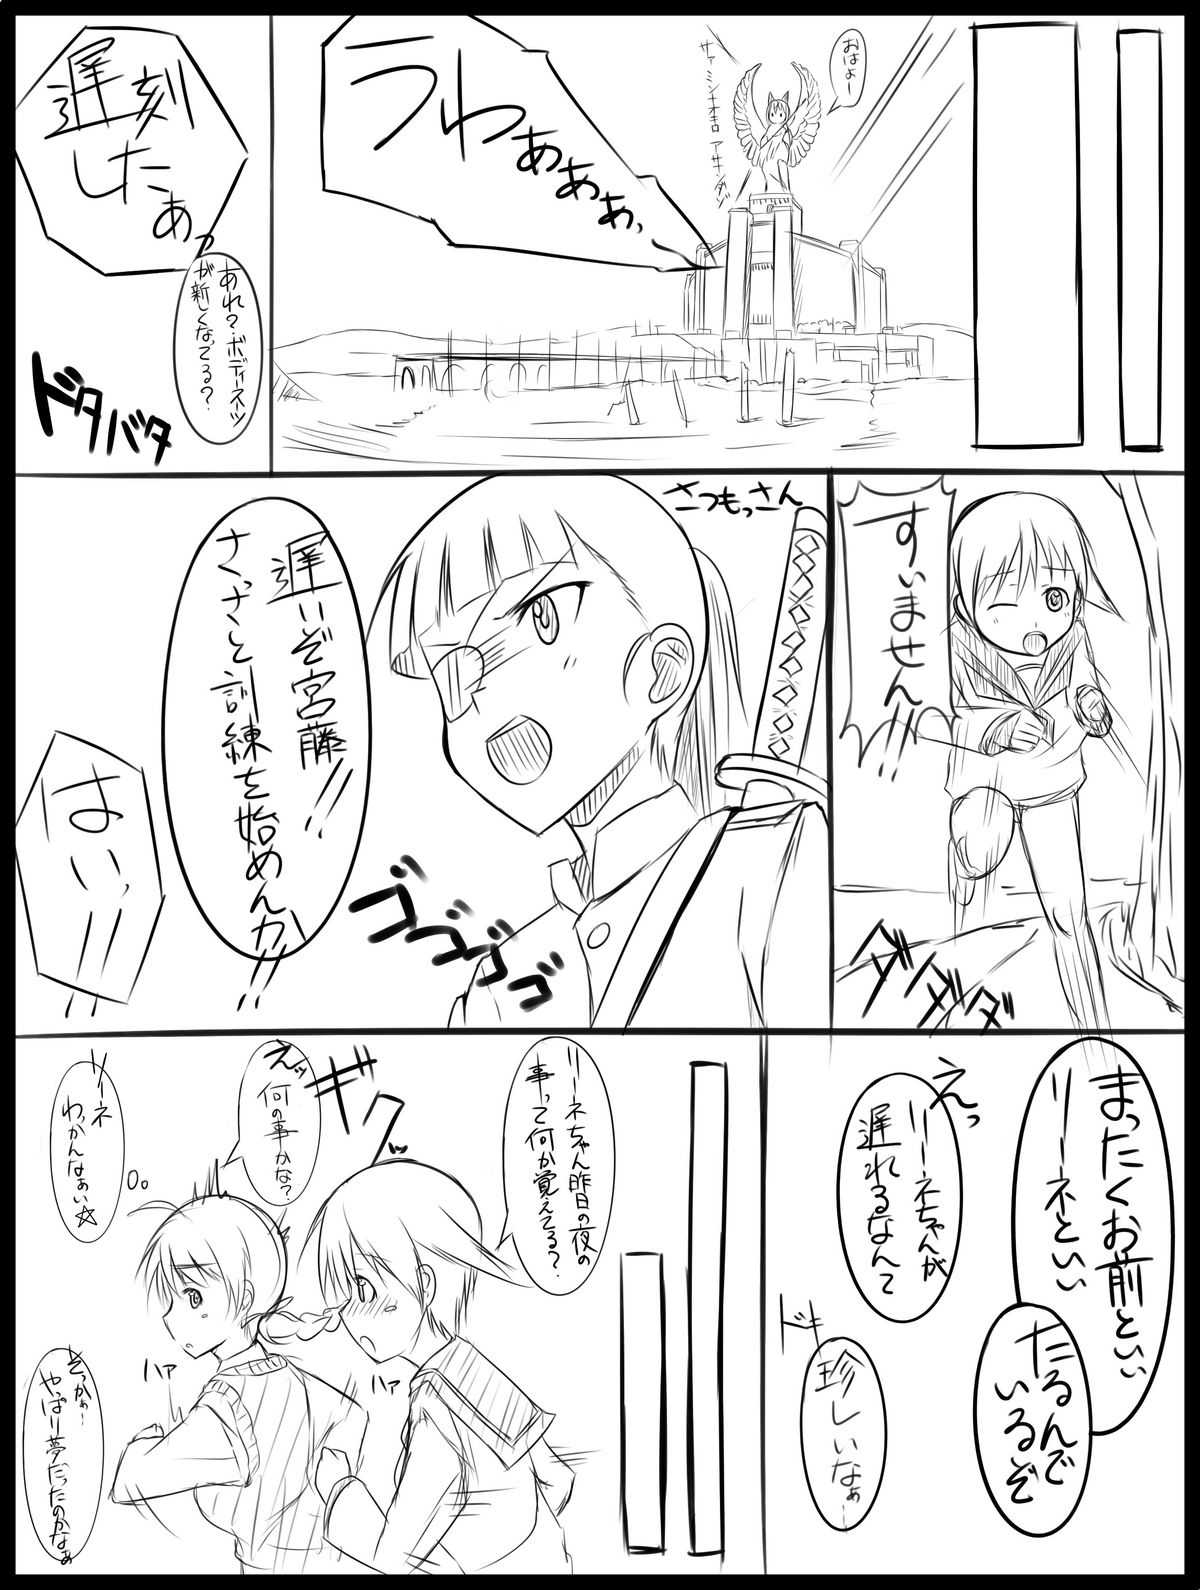 [94Plum] Doujin 1 (Strike Witches) 